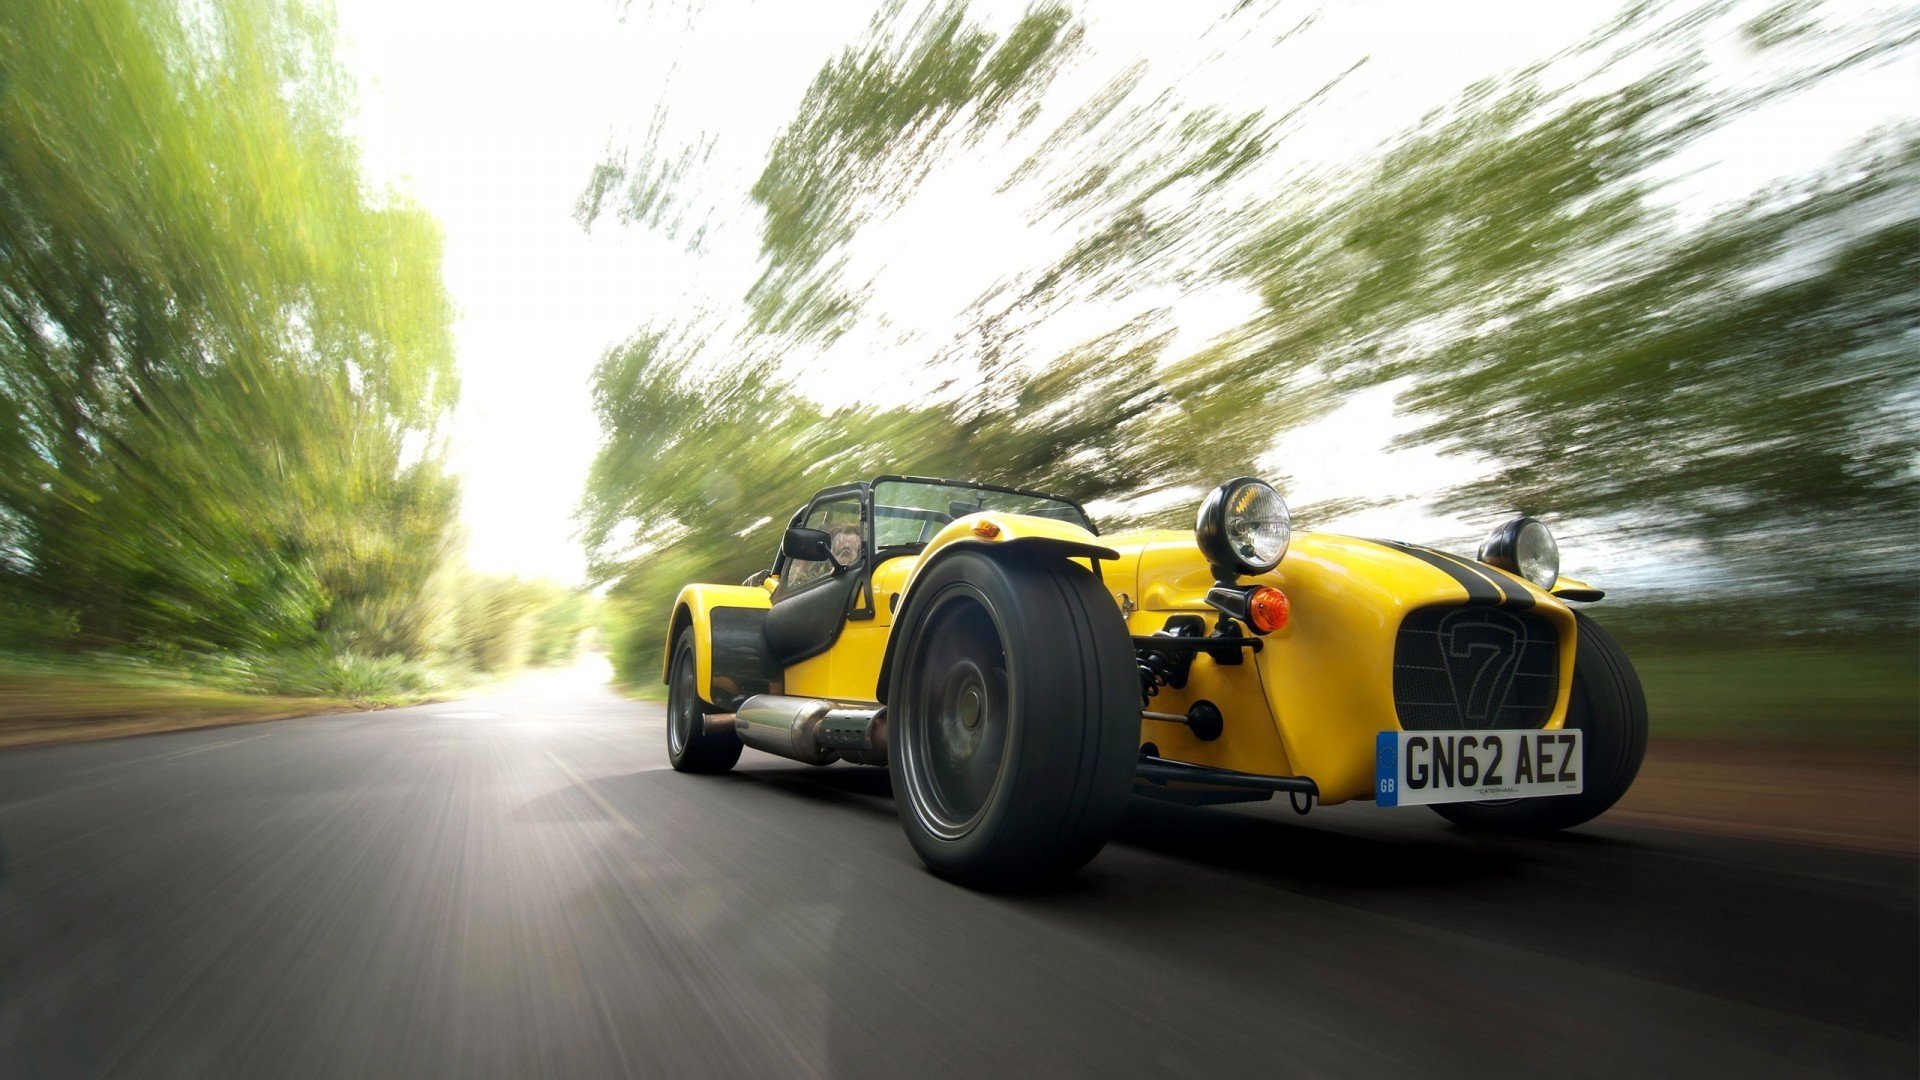 Caterham wallpapers hd desktop and mobile backgrounds